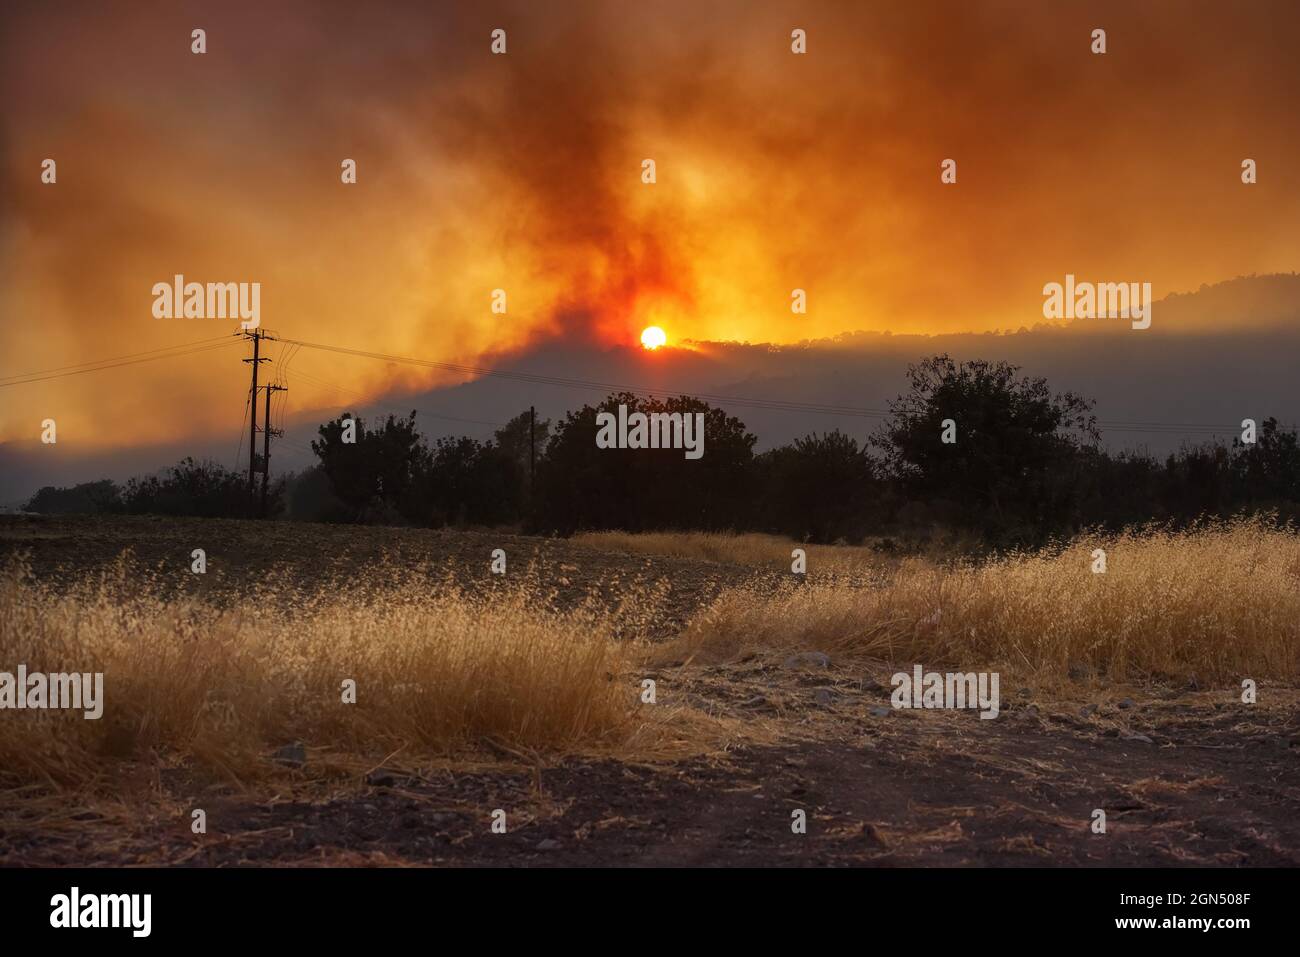 Rural Cyprus landscape at sunset with agricultural field and dramatic wildfire on background Stock Photo